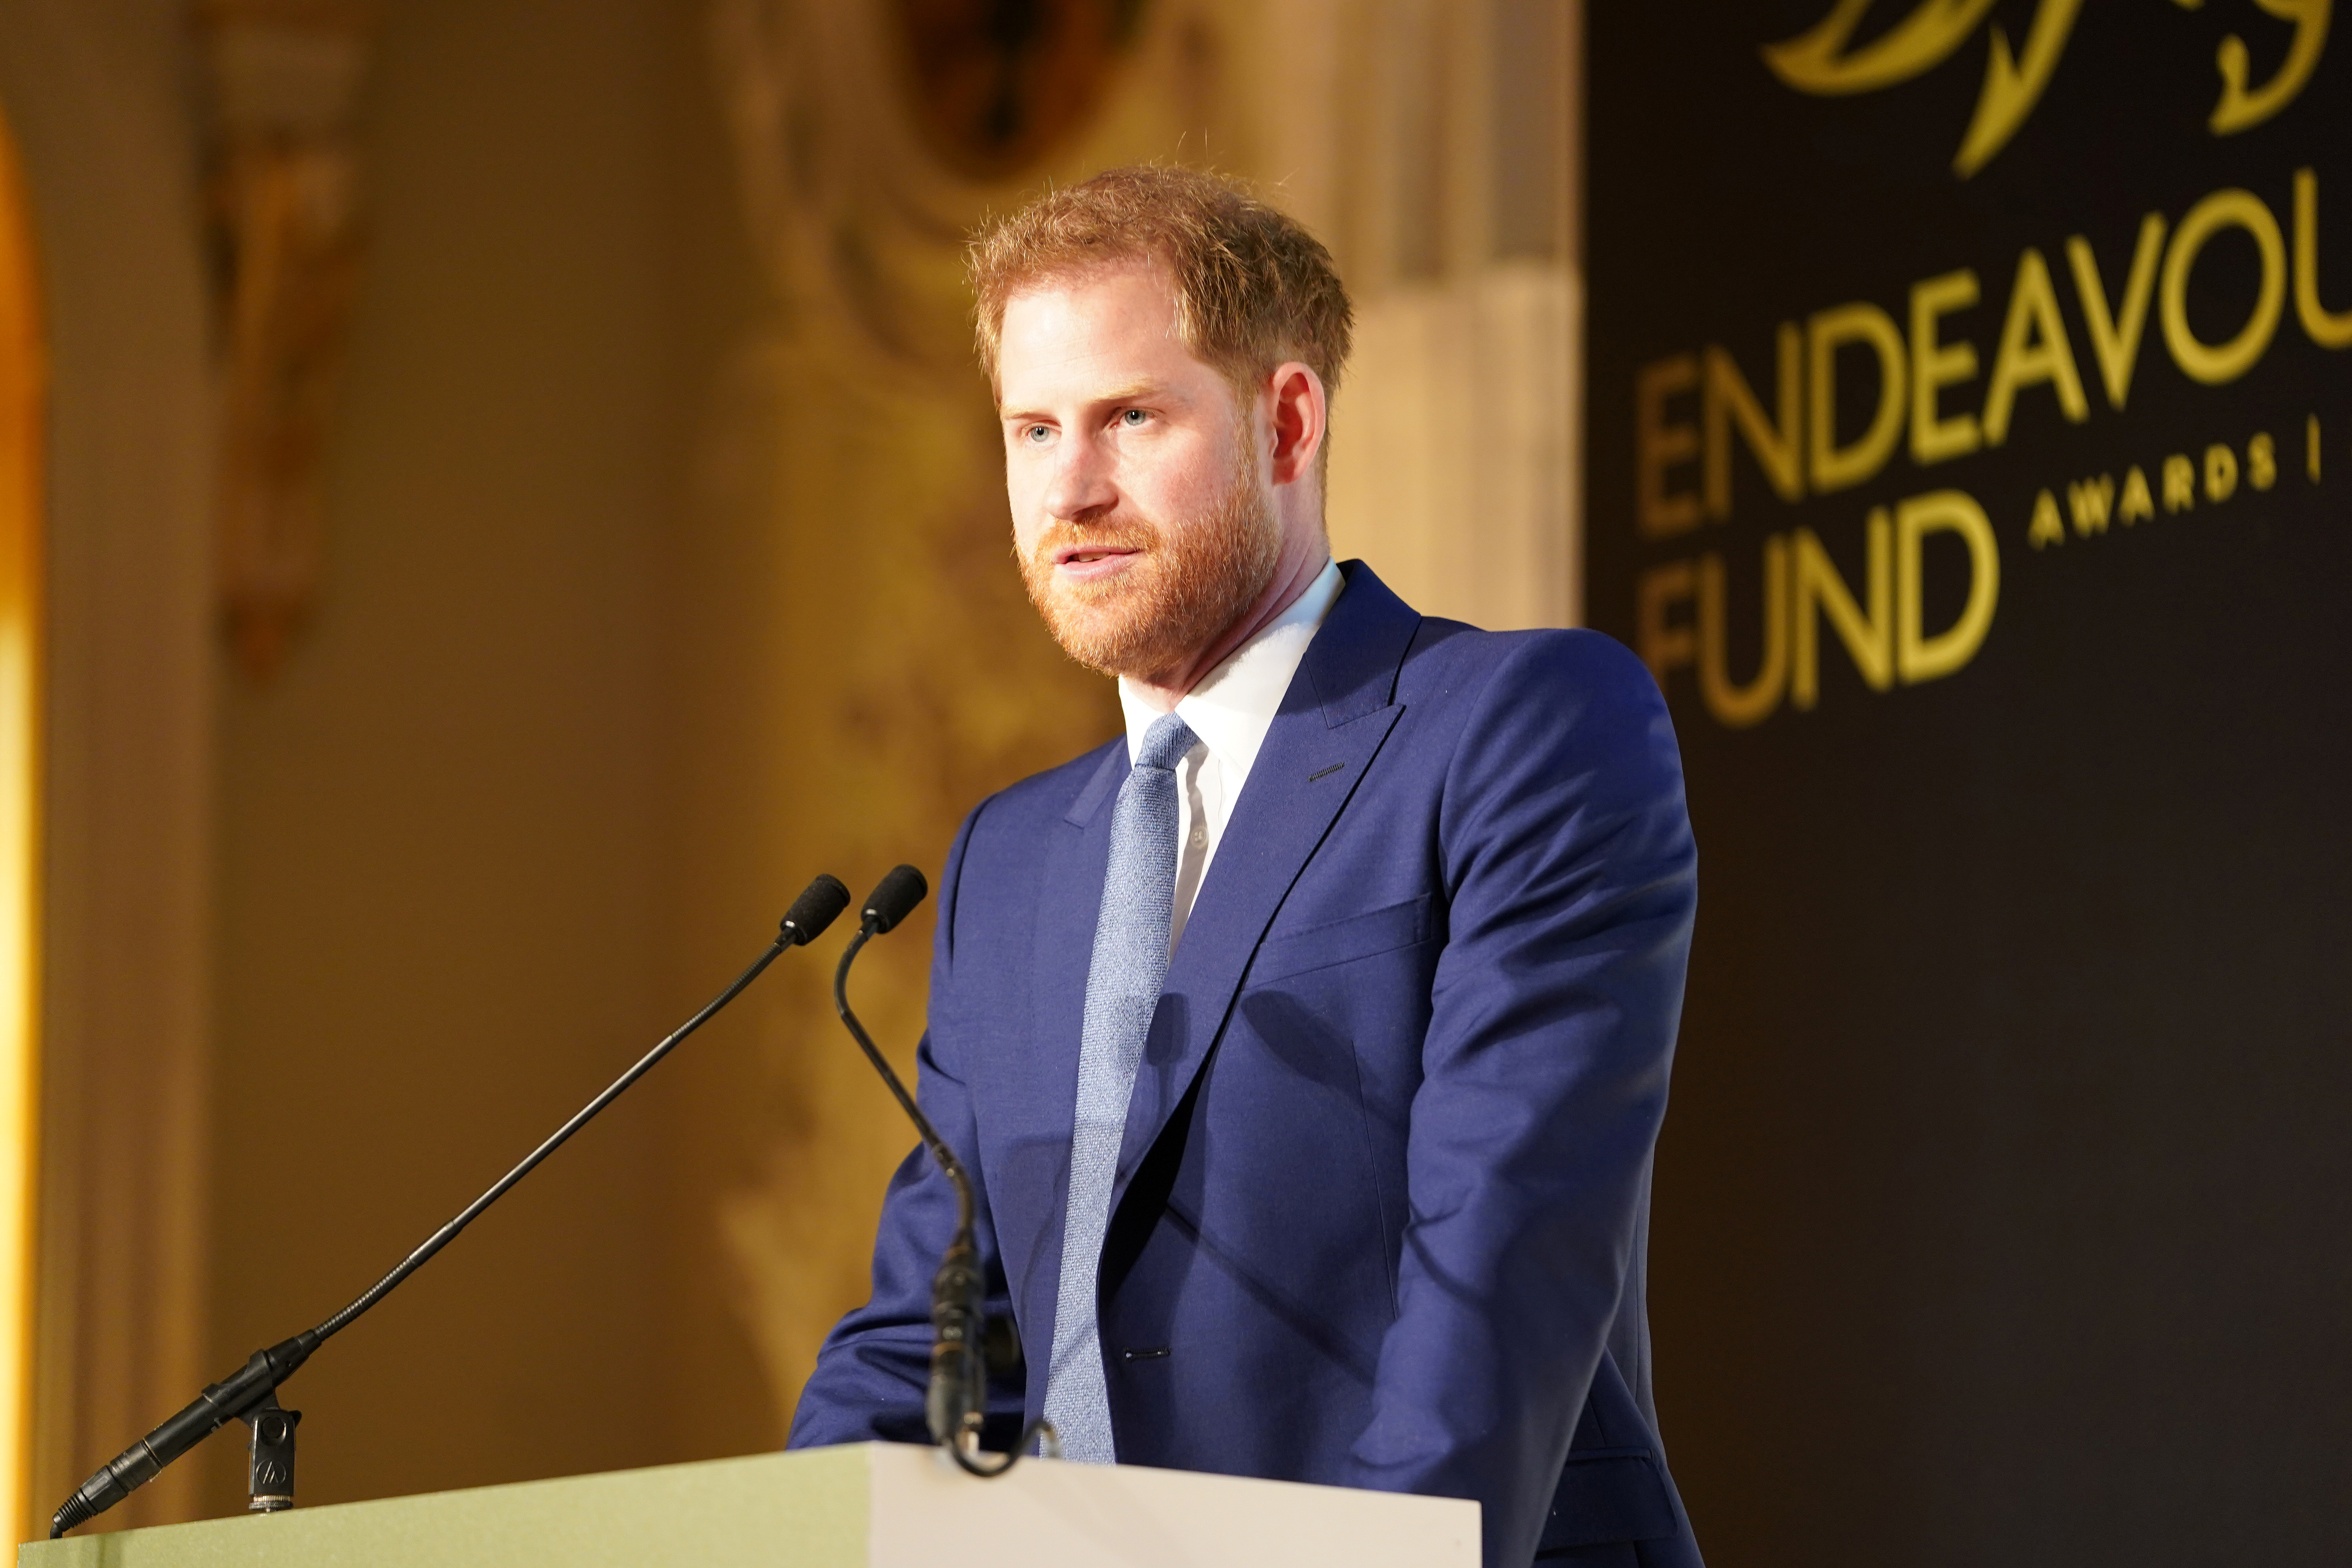 Britain's Prince Harry and Meghan, Duchess of Sussex, attend Endeavour Fund Awards in London